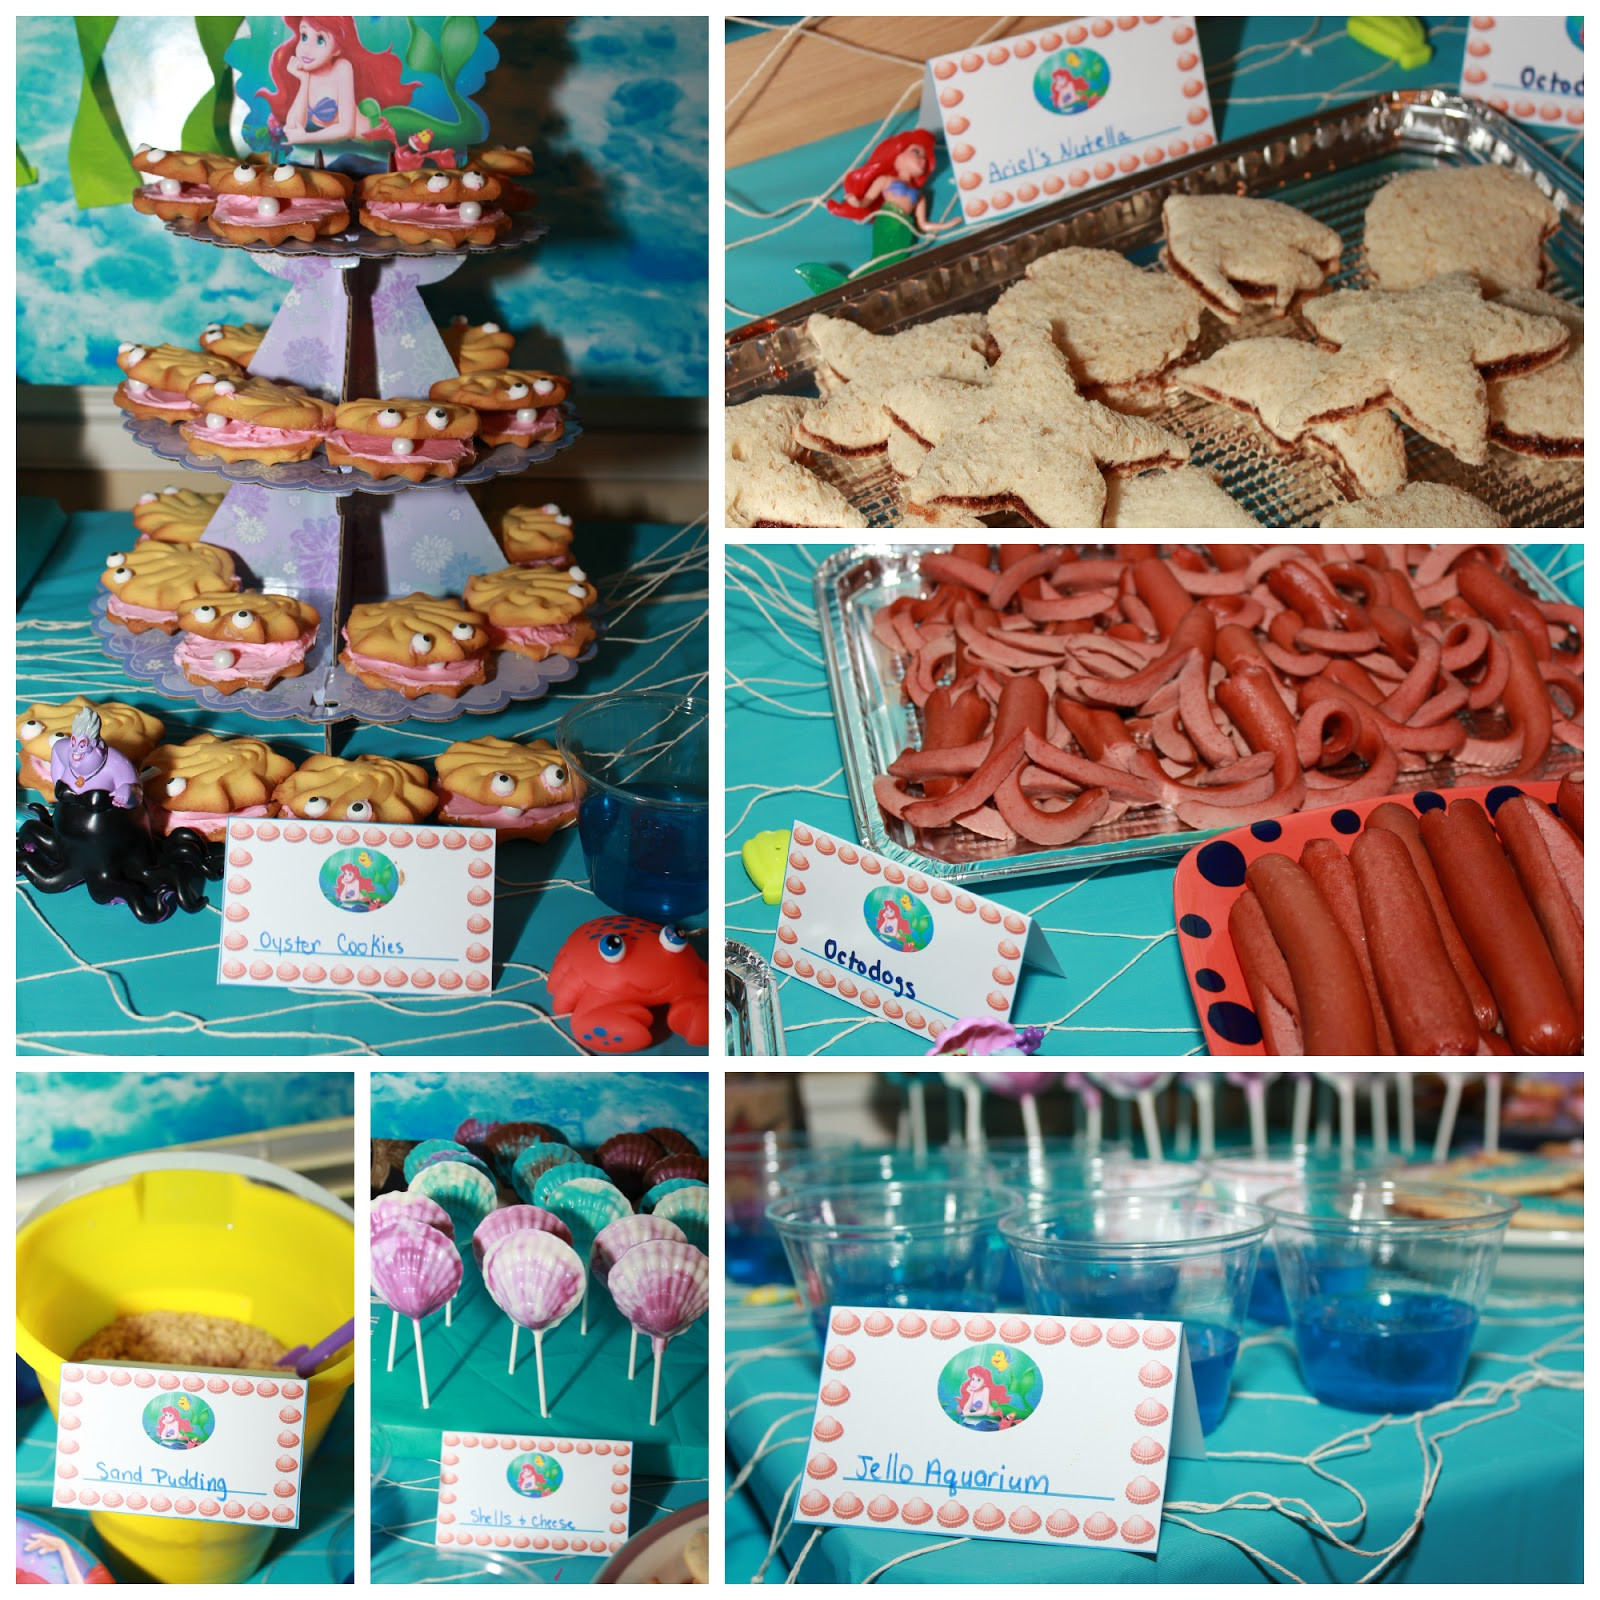 The Little Mermaid Party Ideas
 Melissa s Party Ideas The Little Mermaid Party Ideas